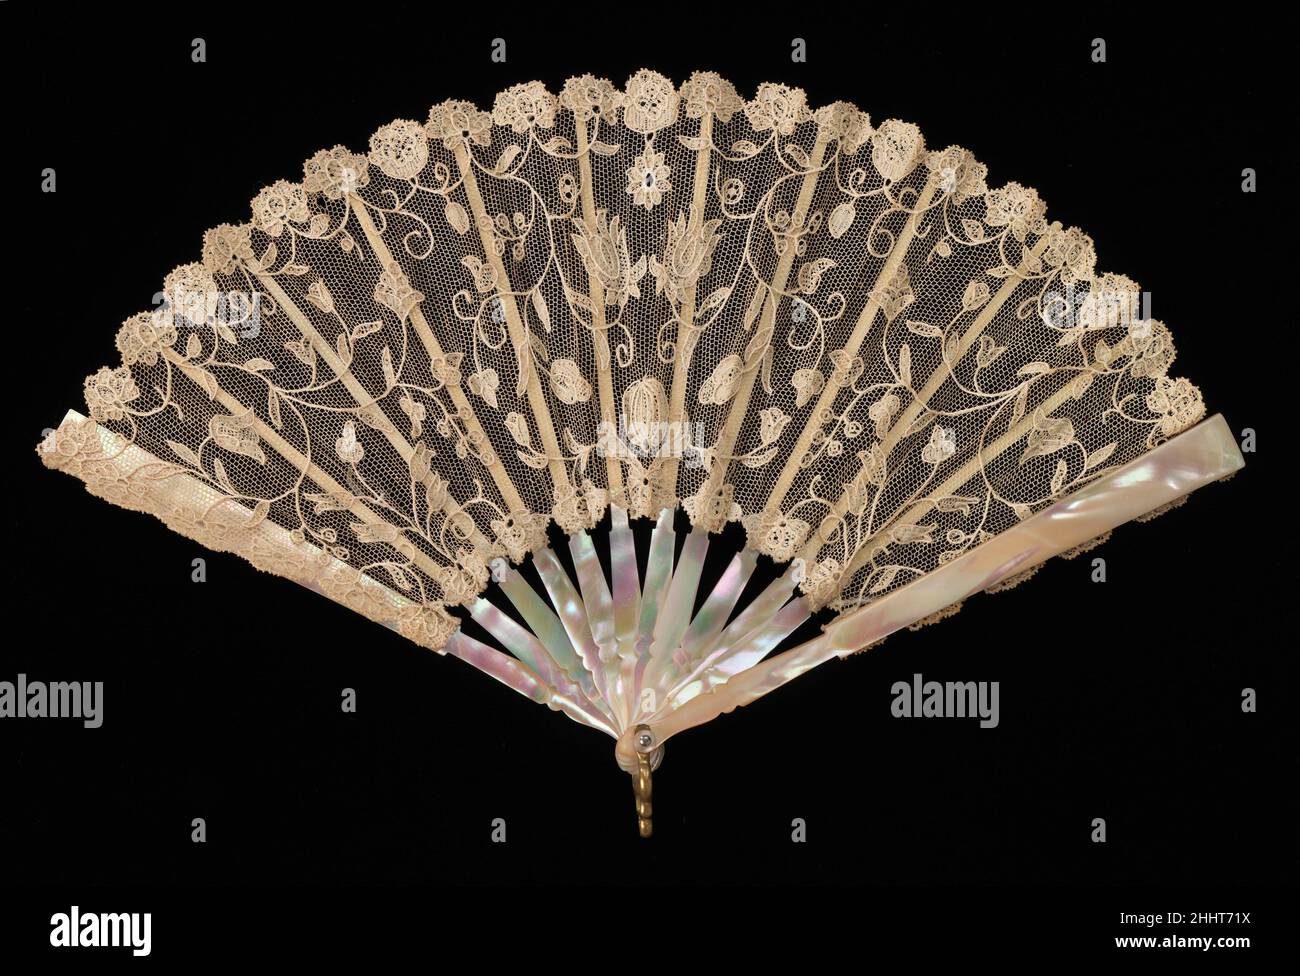 Fan fourth quarter 19th century European This is probably a child's fan but worked with very fine materials. The needle-made lace of the leaf is handmade and the placement of the motifs indicates it is made precisely for a fan of this size and shape; particularly charming is the melon shape beneath the two flowers at the center of the leaf.. Fan  156846 Stock Photo